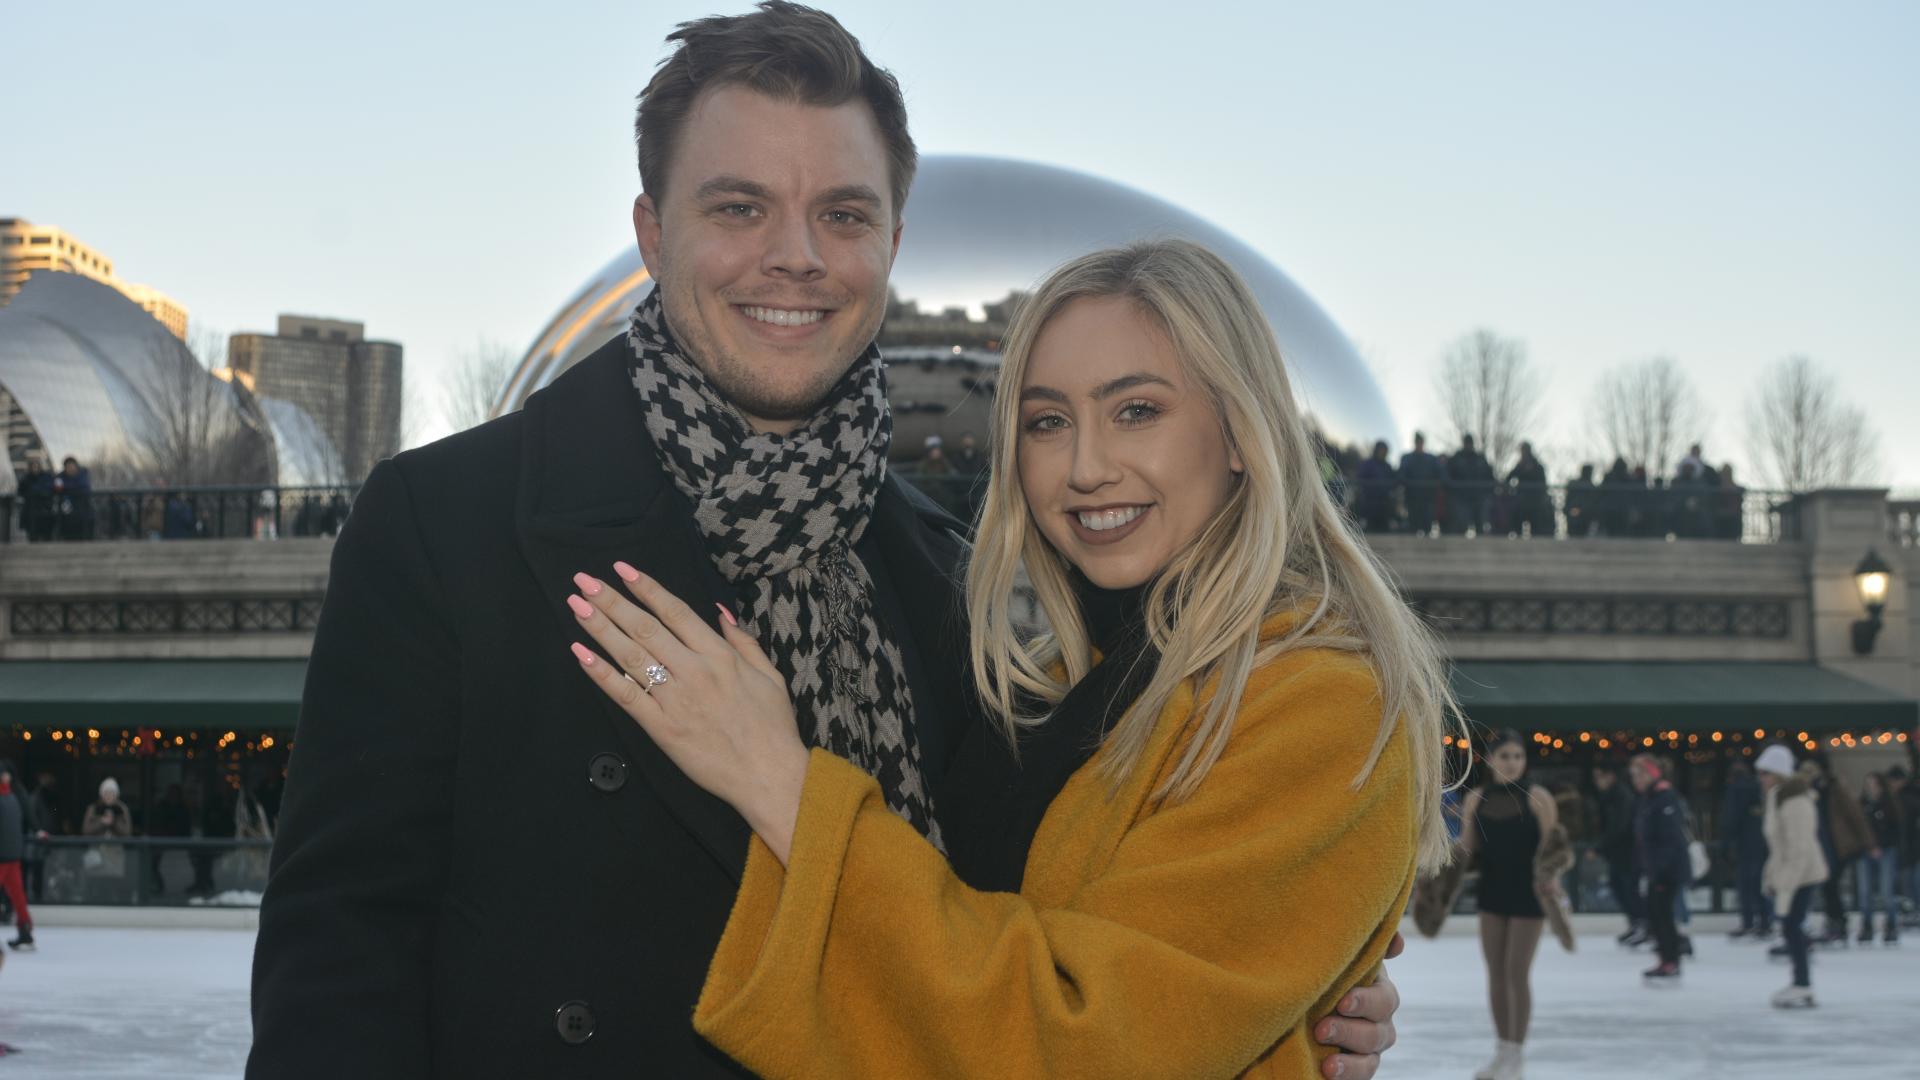 Joey and Jayme Proposal in Chicago